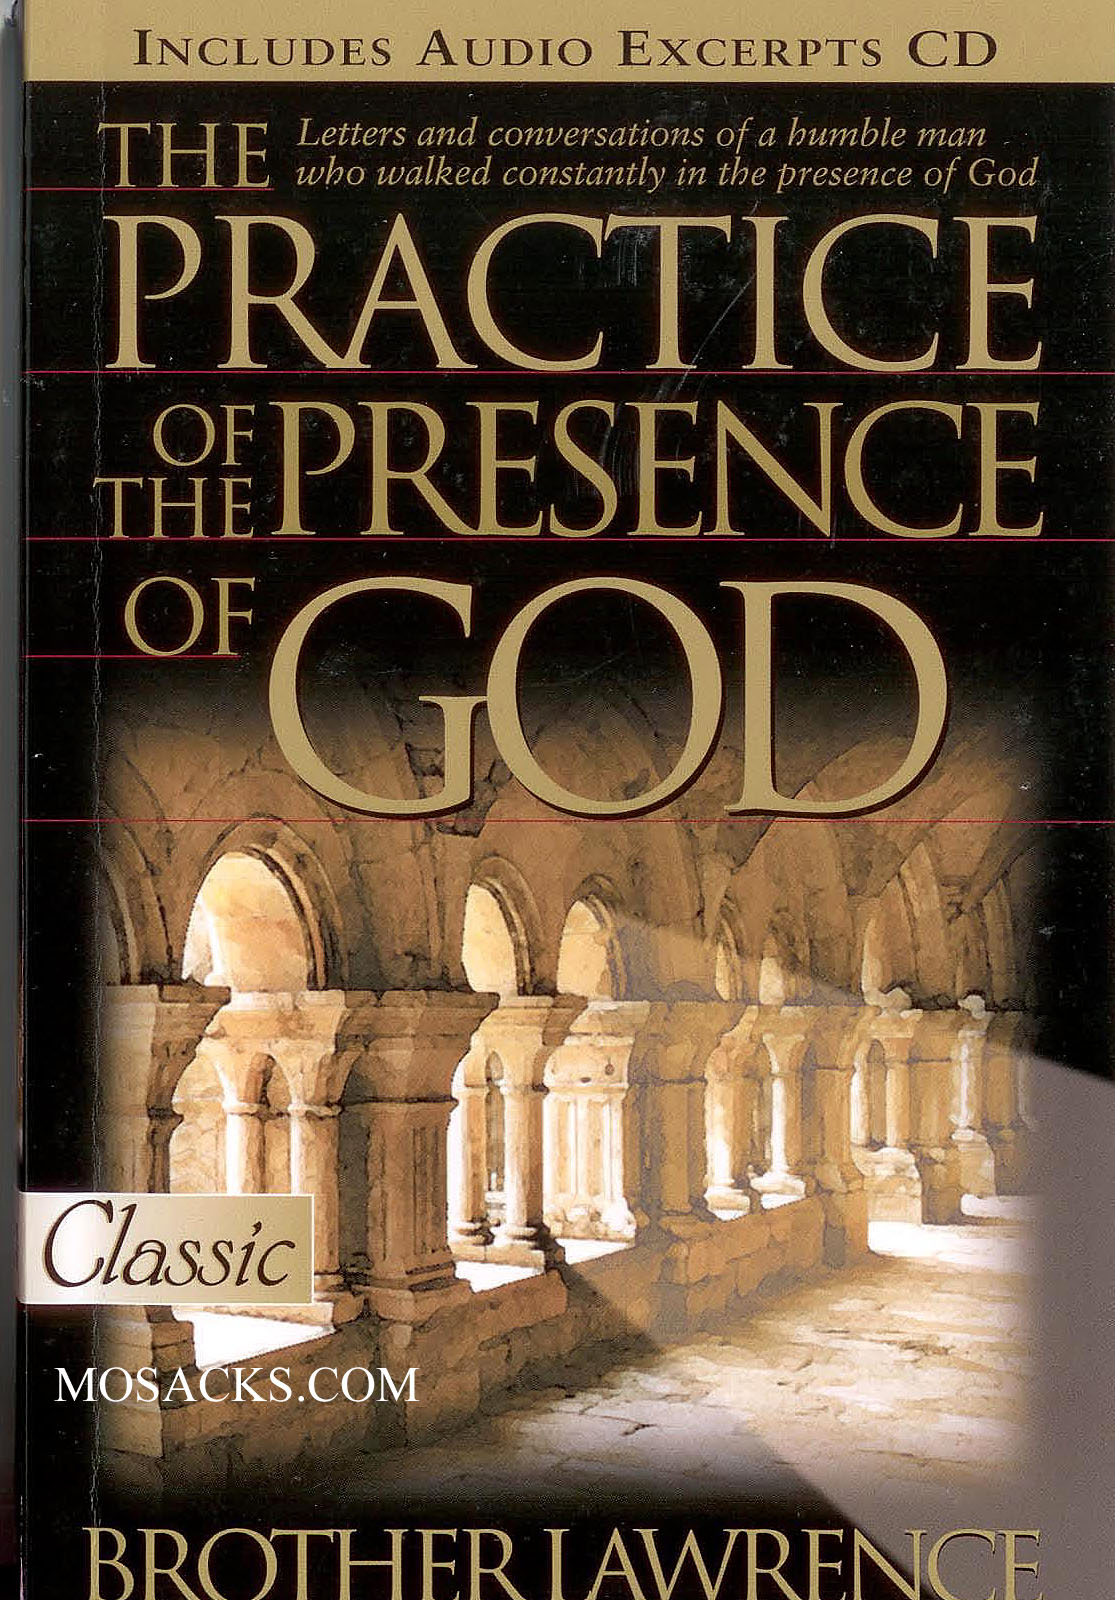 The Practice Of  The Presence God by Brother Lawrence